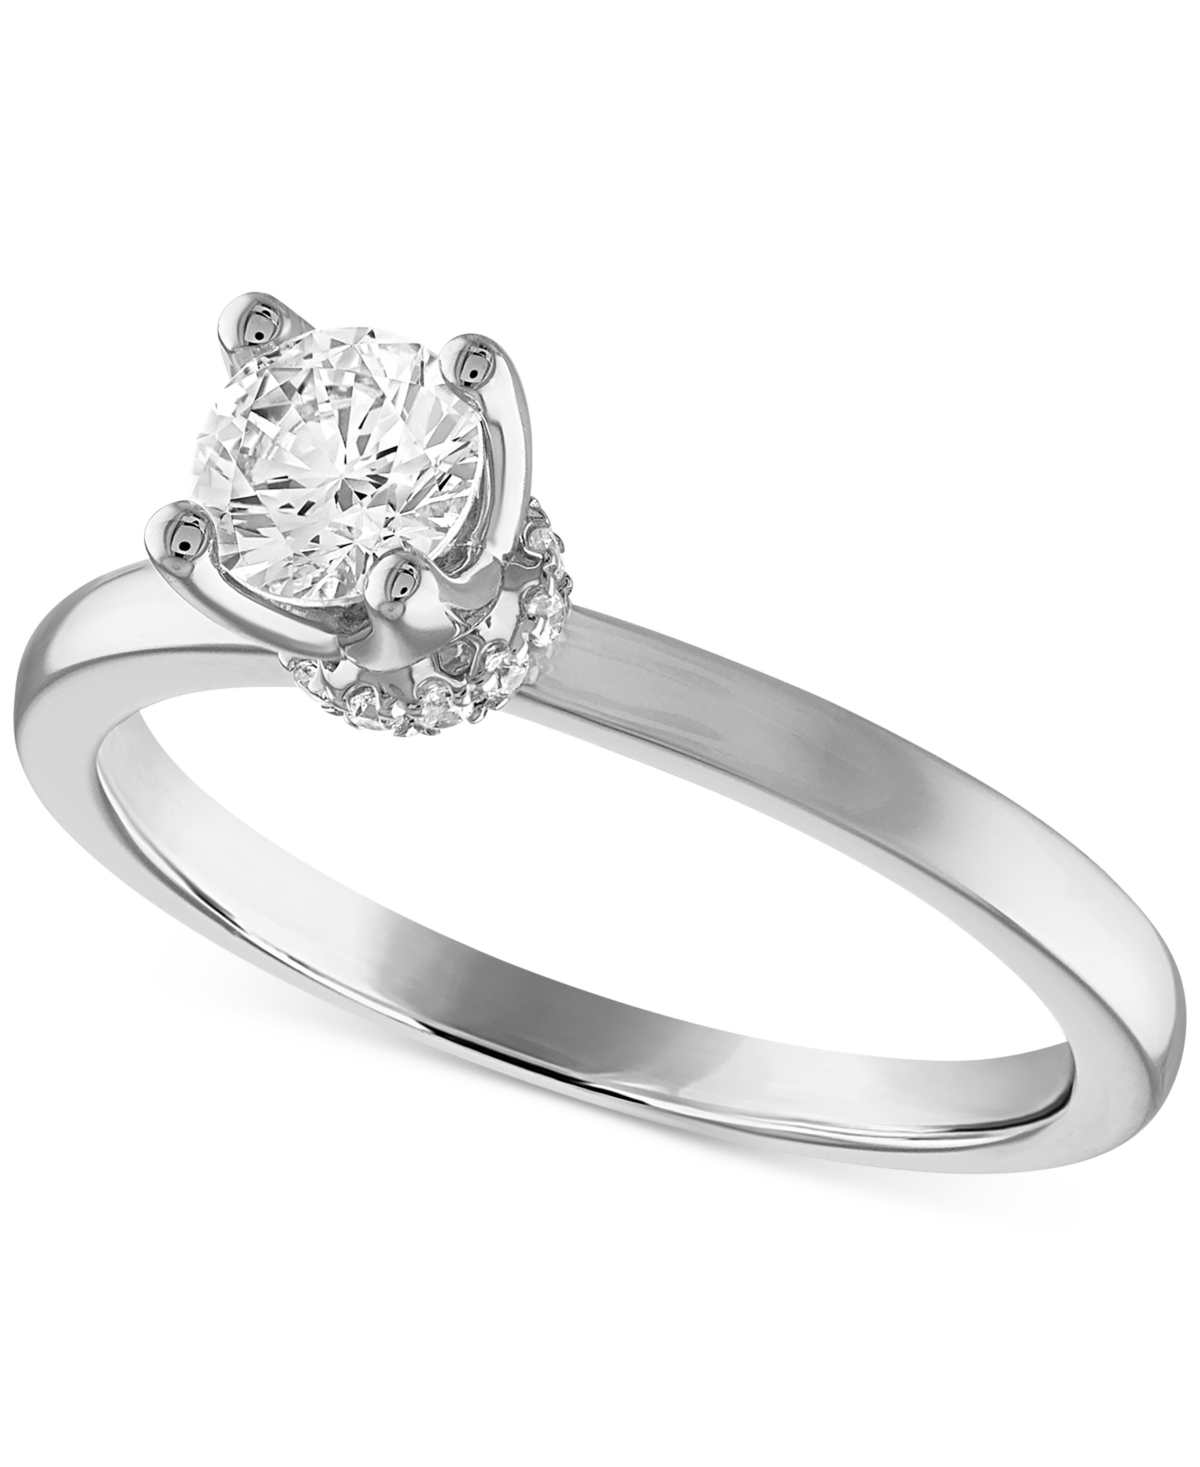 Certified Diamond Solitaire Engagement Ring (1/2 ct. t.w.) in 14k White Gold featuring diamonds with the De Beers Code of Origin, Created for